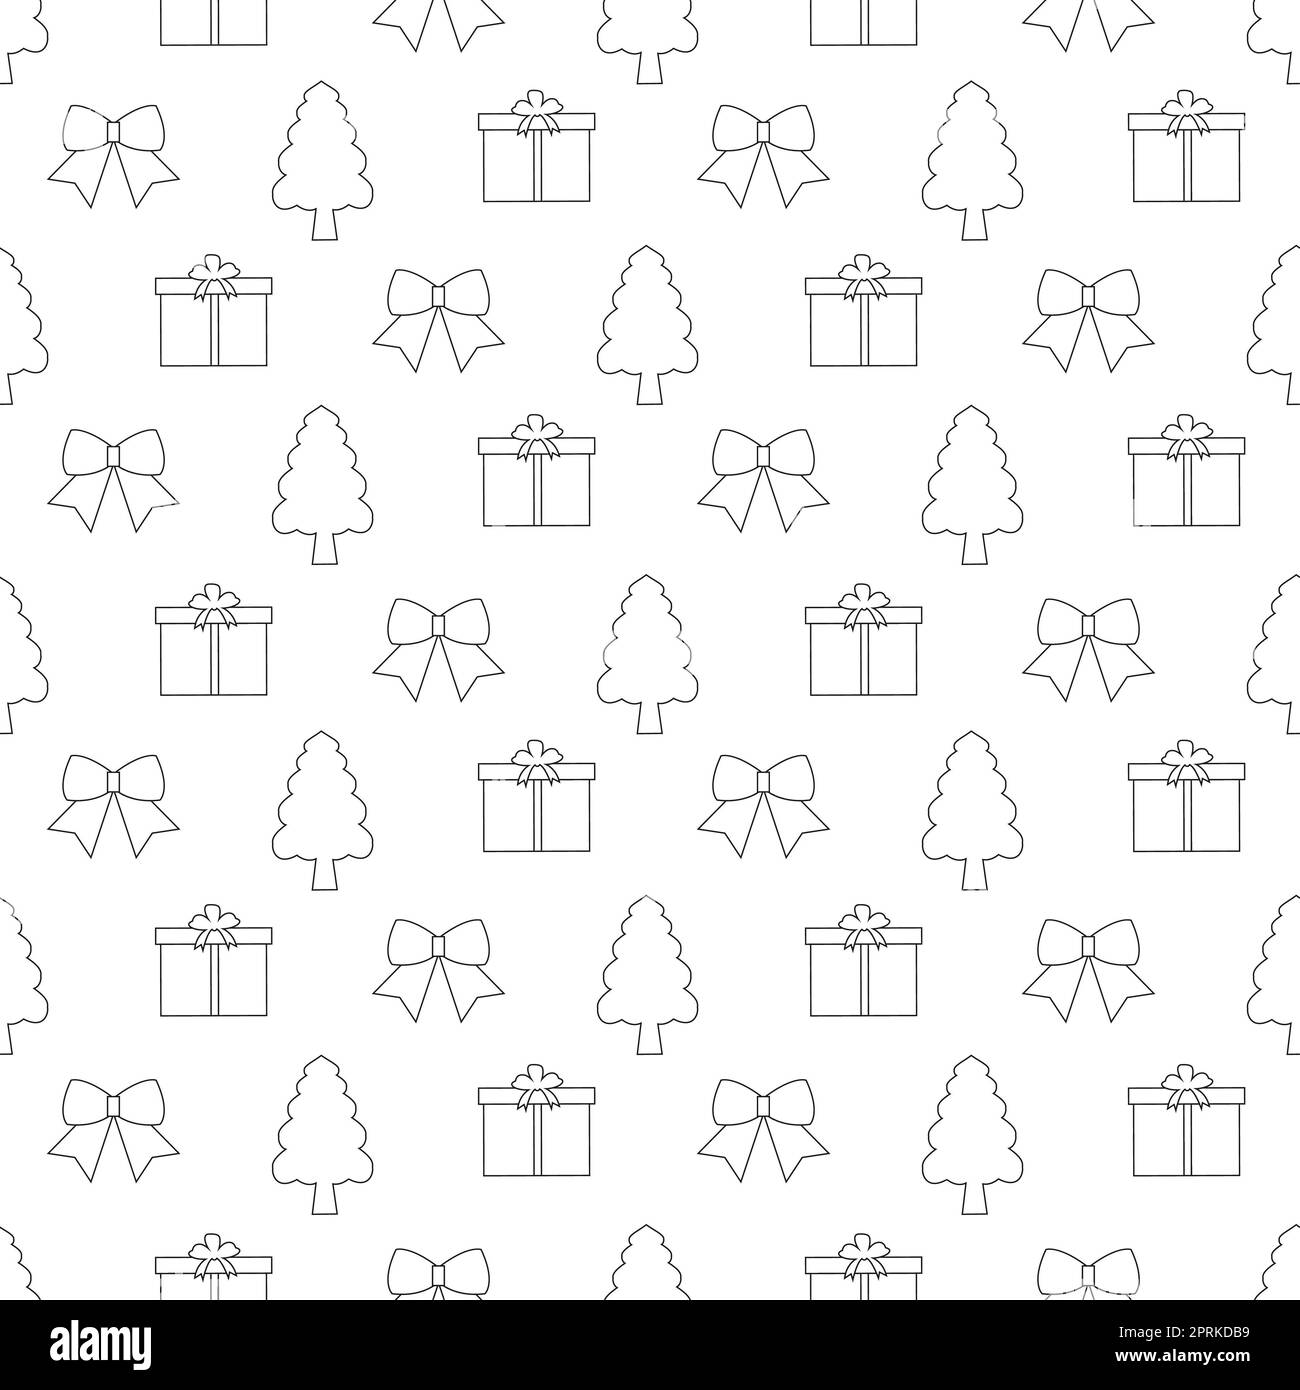 Boxing Day Sale Seamless Pattern Design with Glove and Gift Box for Promotion or Shopping on Template Hand Drawn Cartoon Flat Illustration Stock Photo